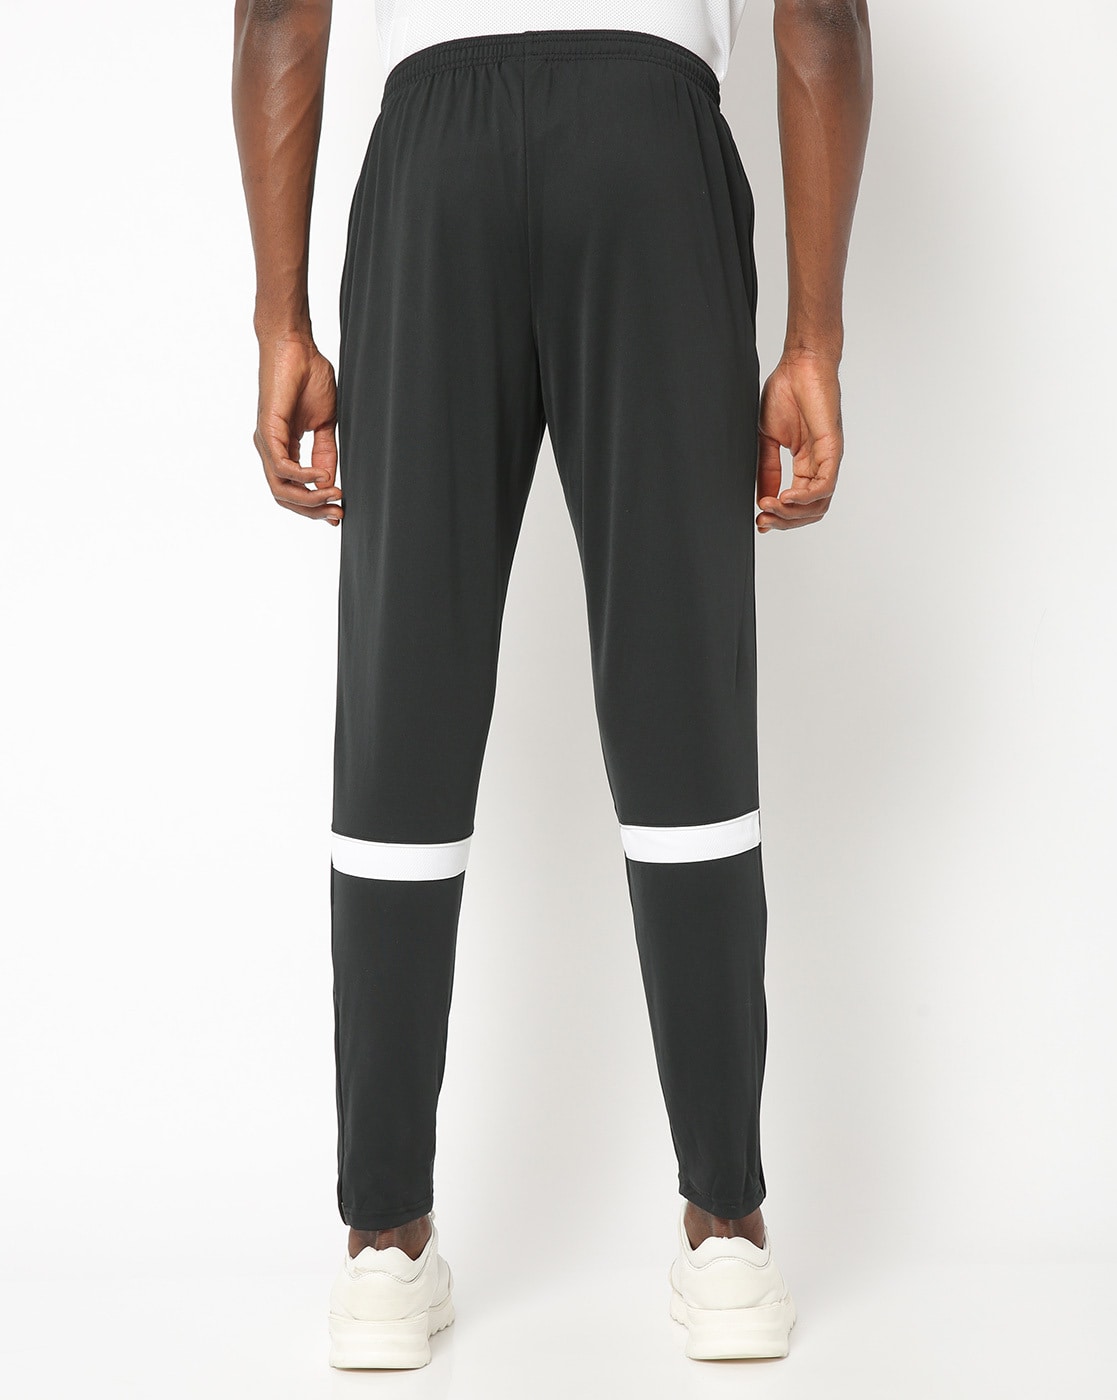 Best Goalkeeper Pants for Padded Protection 2023 Buying Guide